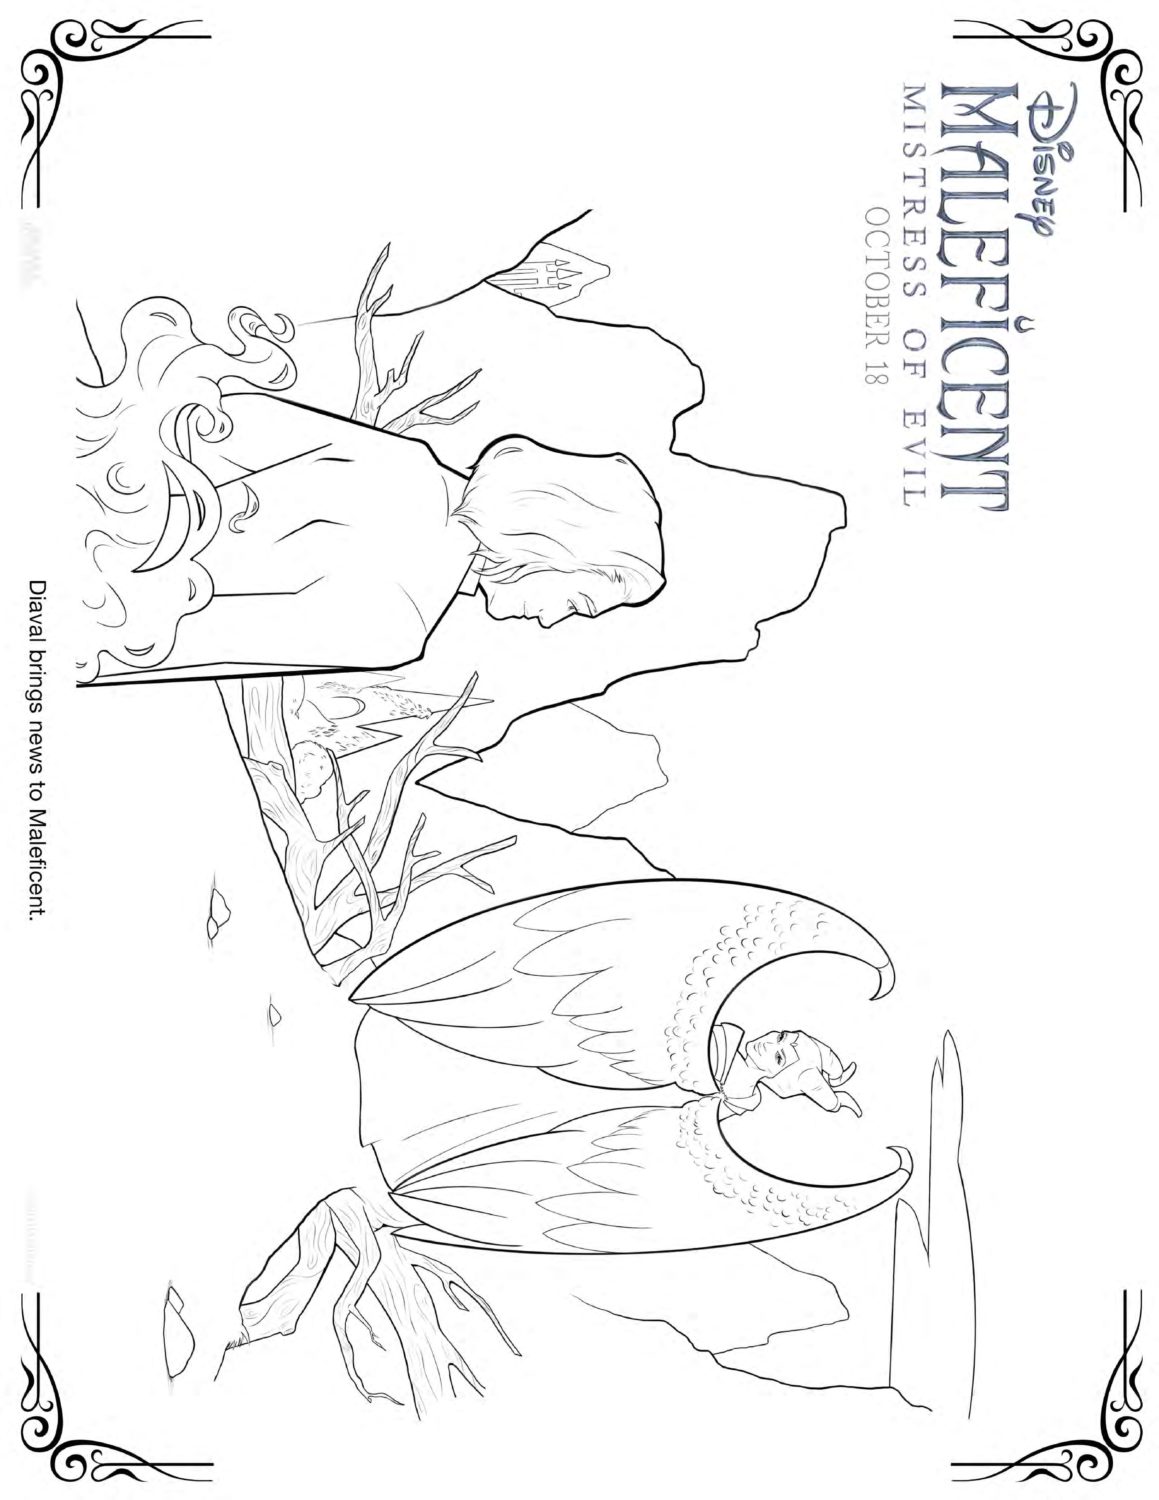 Maleficent 2 Diaval Coloring Pages and Activity Sheets